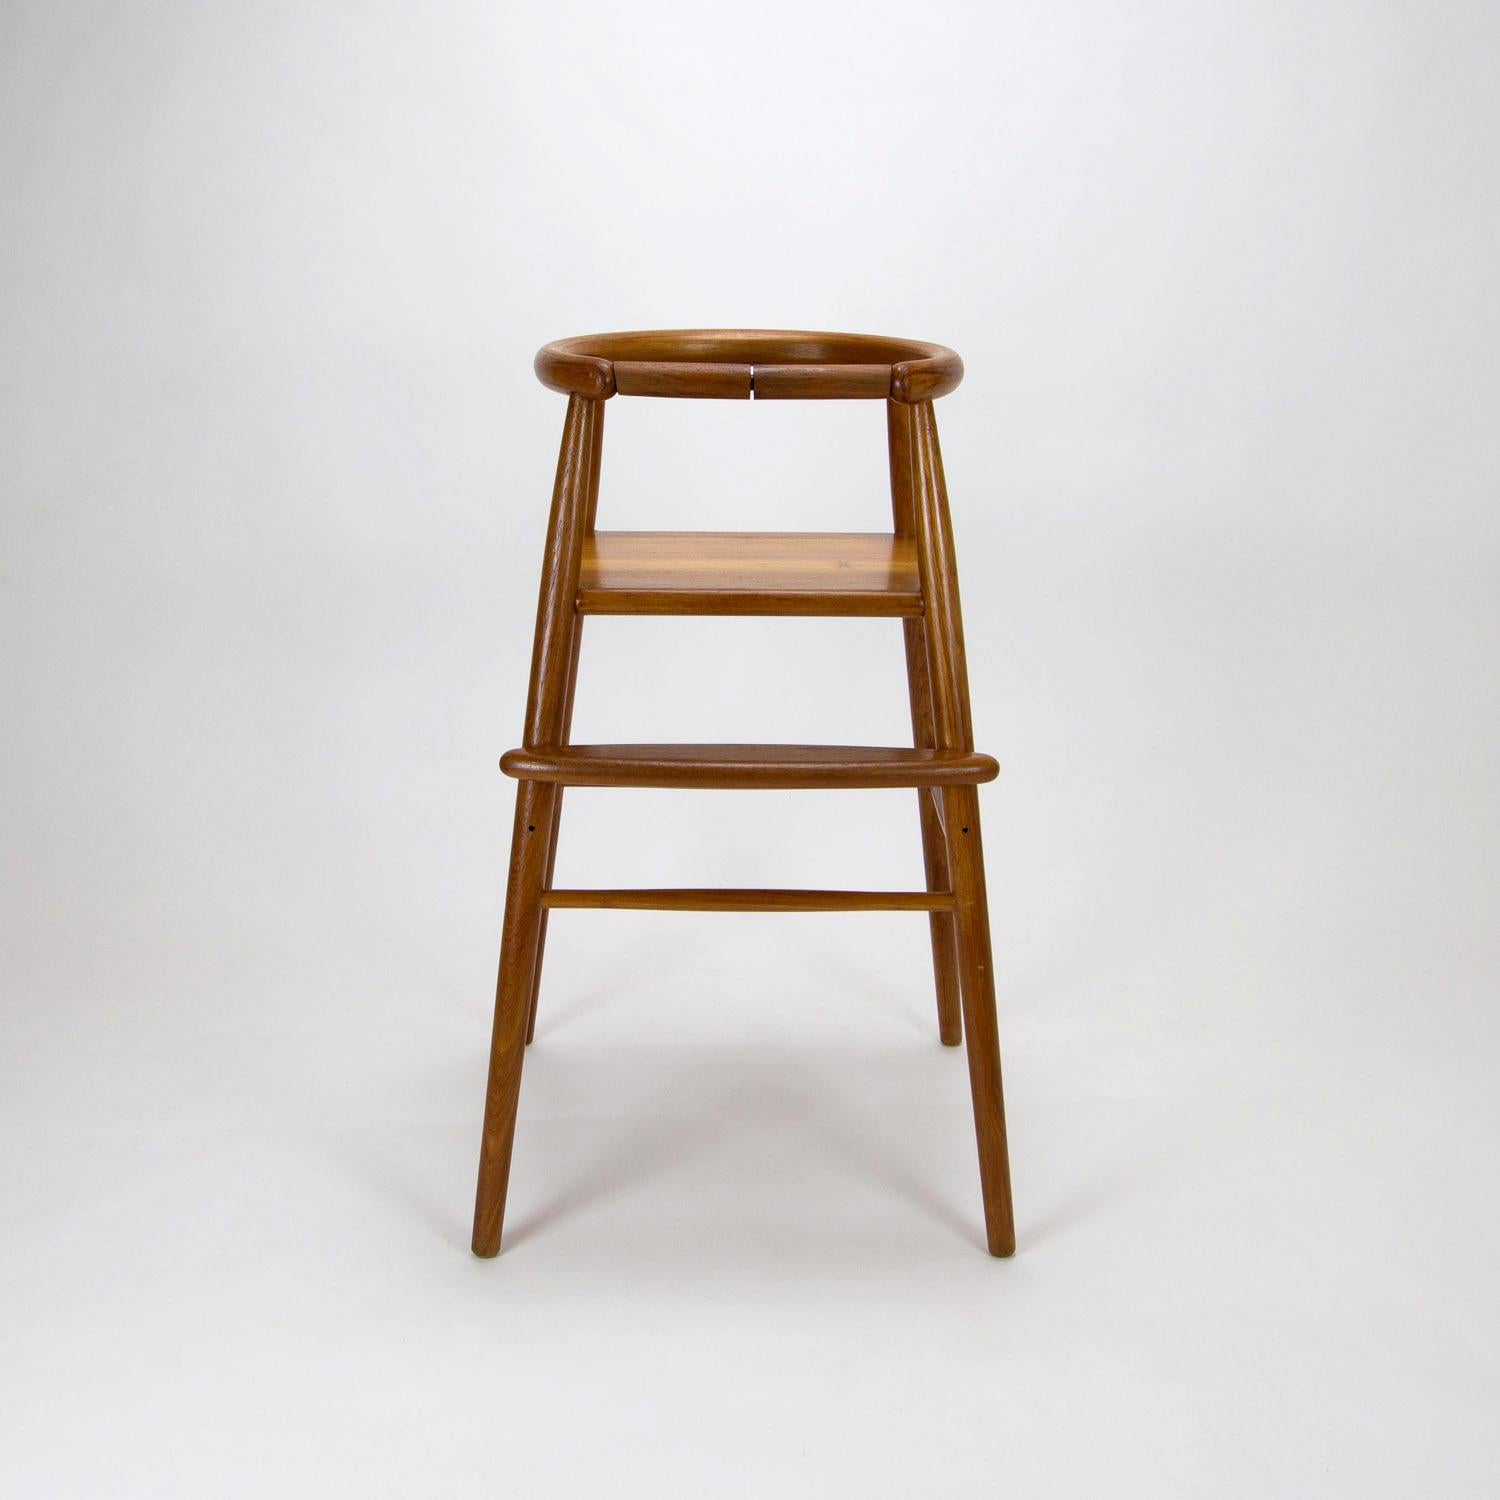 Nanna Ditzel’s iconic model 115 children’s high chair in solid teak by Trip Trap, Denmark, 1970s. Seat height 53cm, height adjustable footrest and removable safety bar.